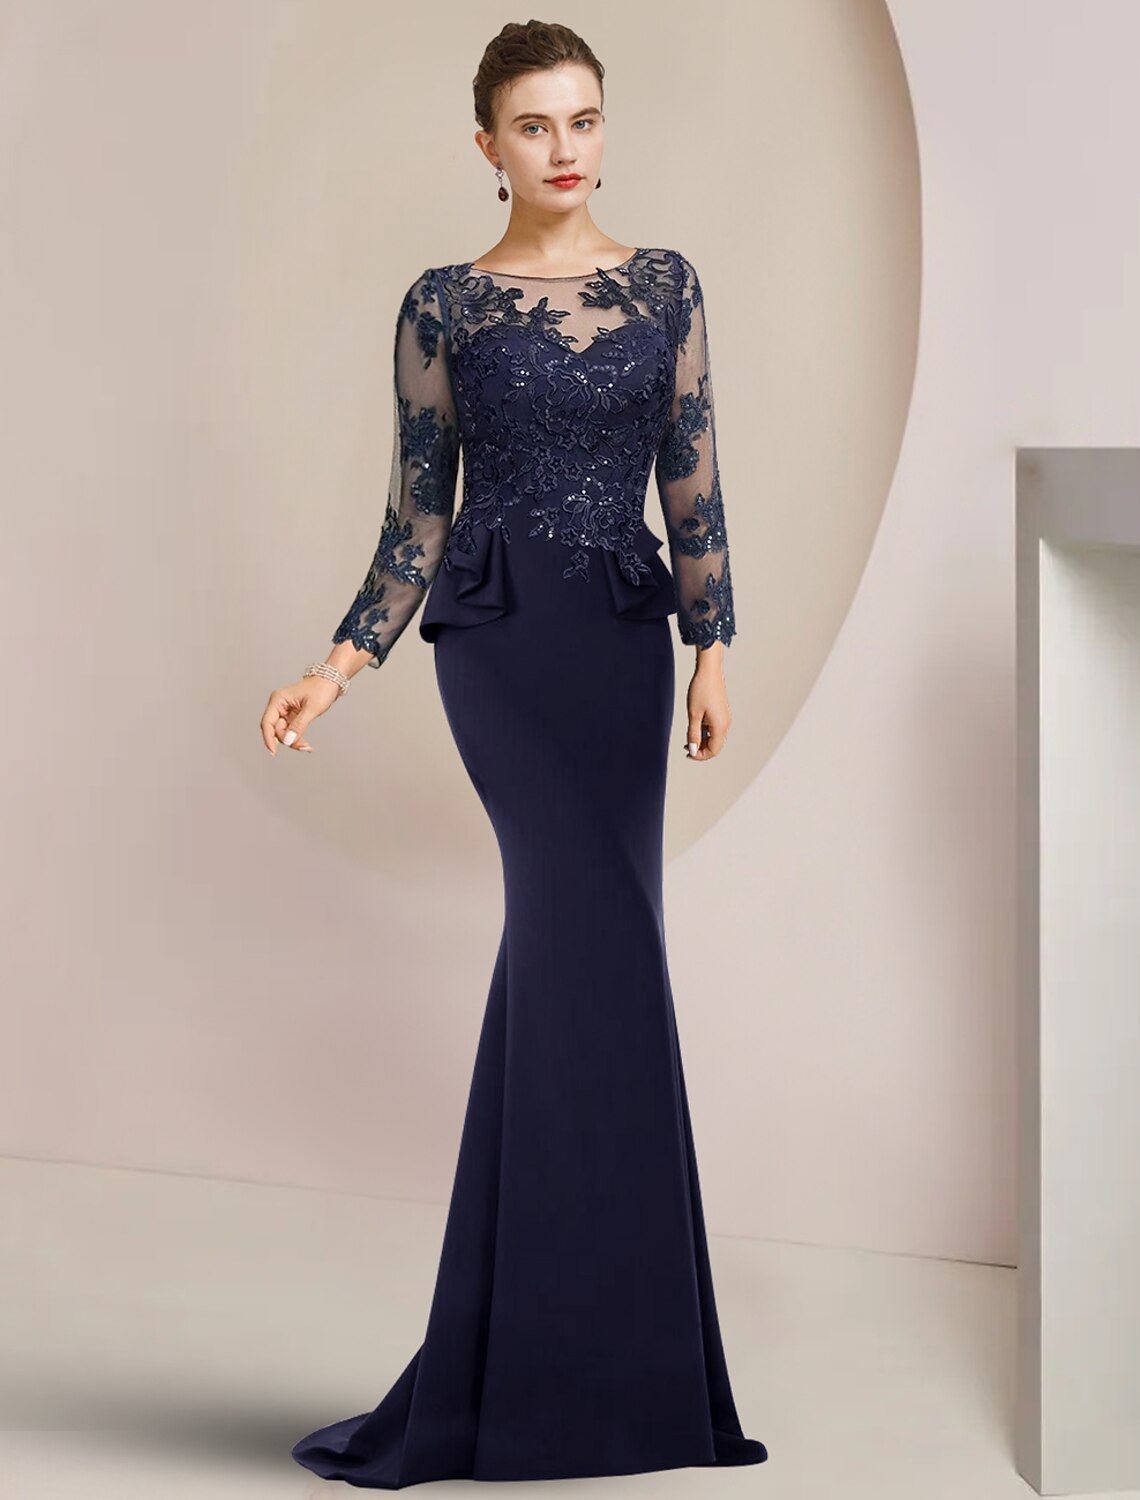 Mermaid / Trumpet Mother of the Bride Dress Formal Wedding Guest Party Elegant Scoop Neck Sweep / Brush Train Chiffon Sequined Long Sleeve with Sequin Ruffles Appliques